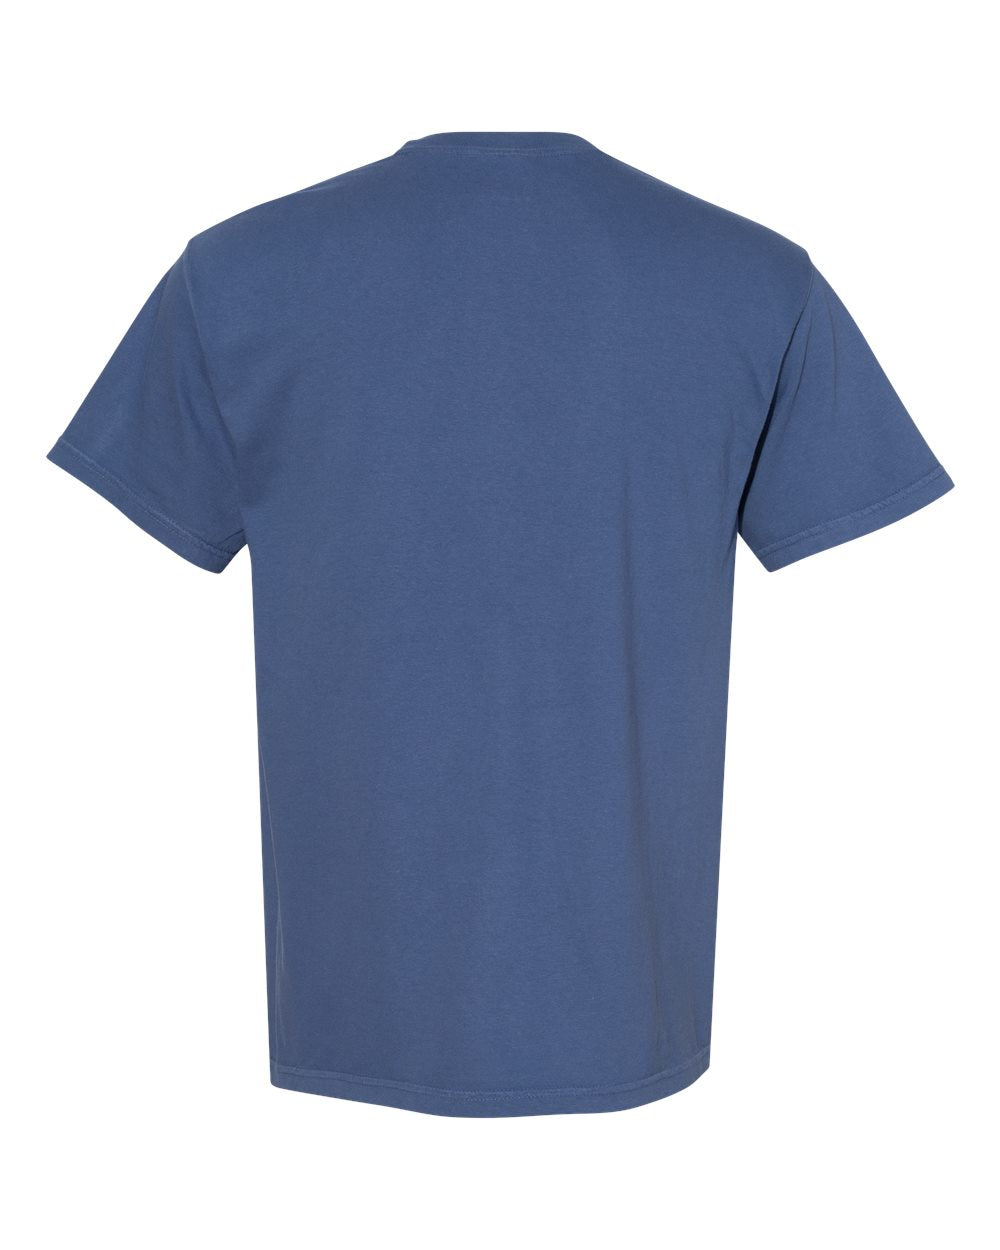 Comfort Colors - Garment-Dyed Heavyweight T-Shirt OTHER COLORS- 1717 SKU#00708